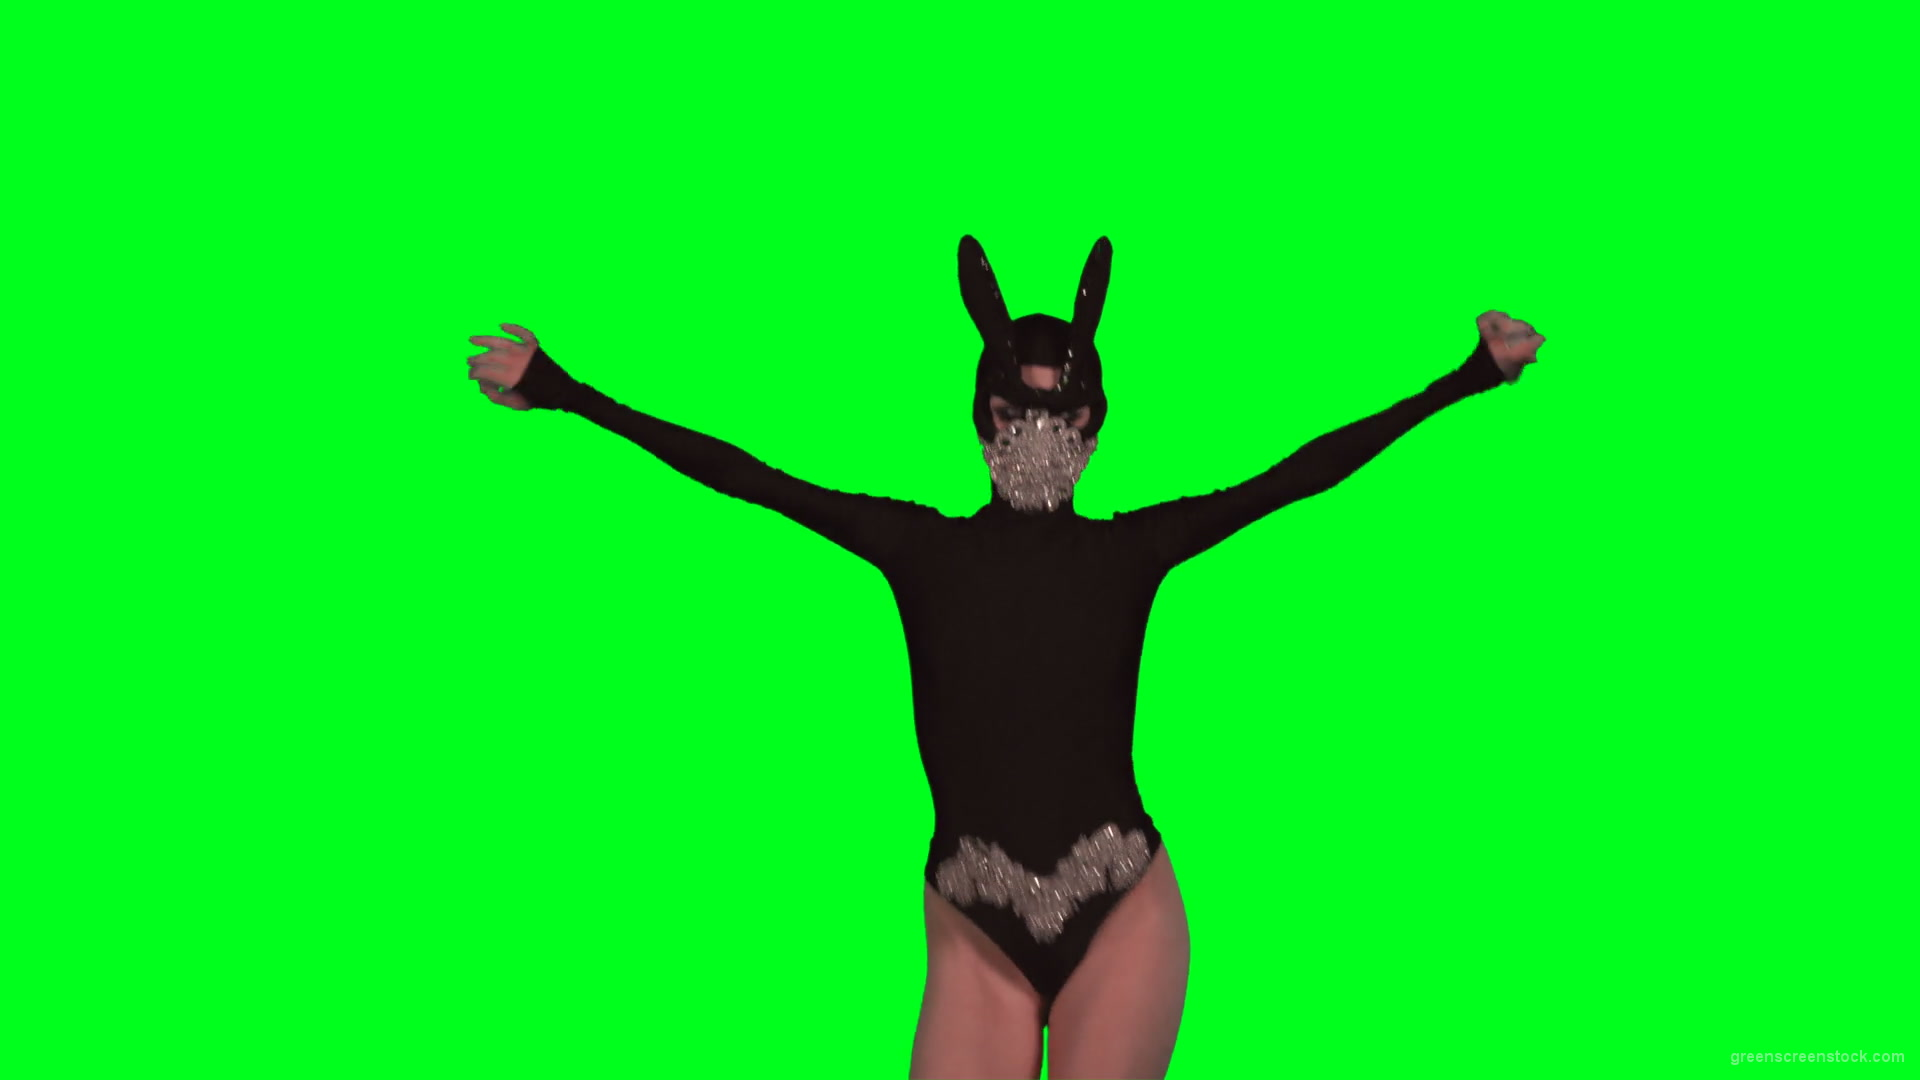 Rave-Calling-EDM-Go-Go-Dancing-Girl-performs-on-green-screen-4K-Video-Footage-1920_008 Green Screen Stock